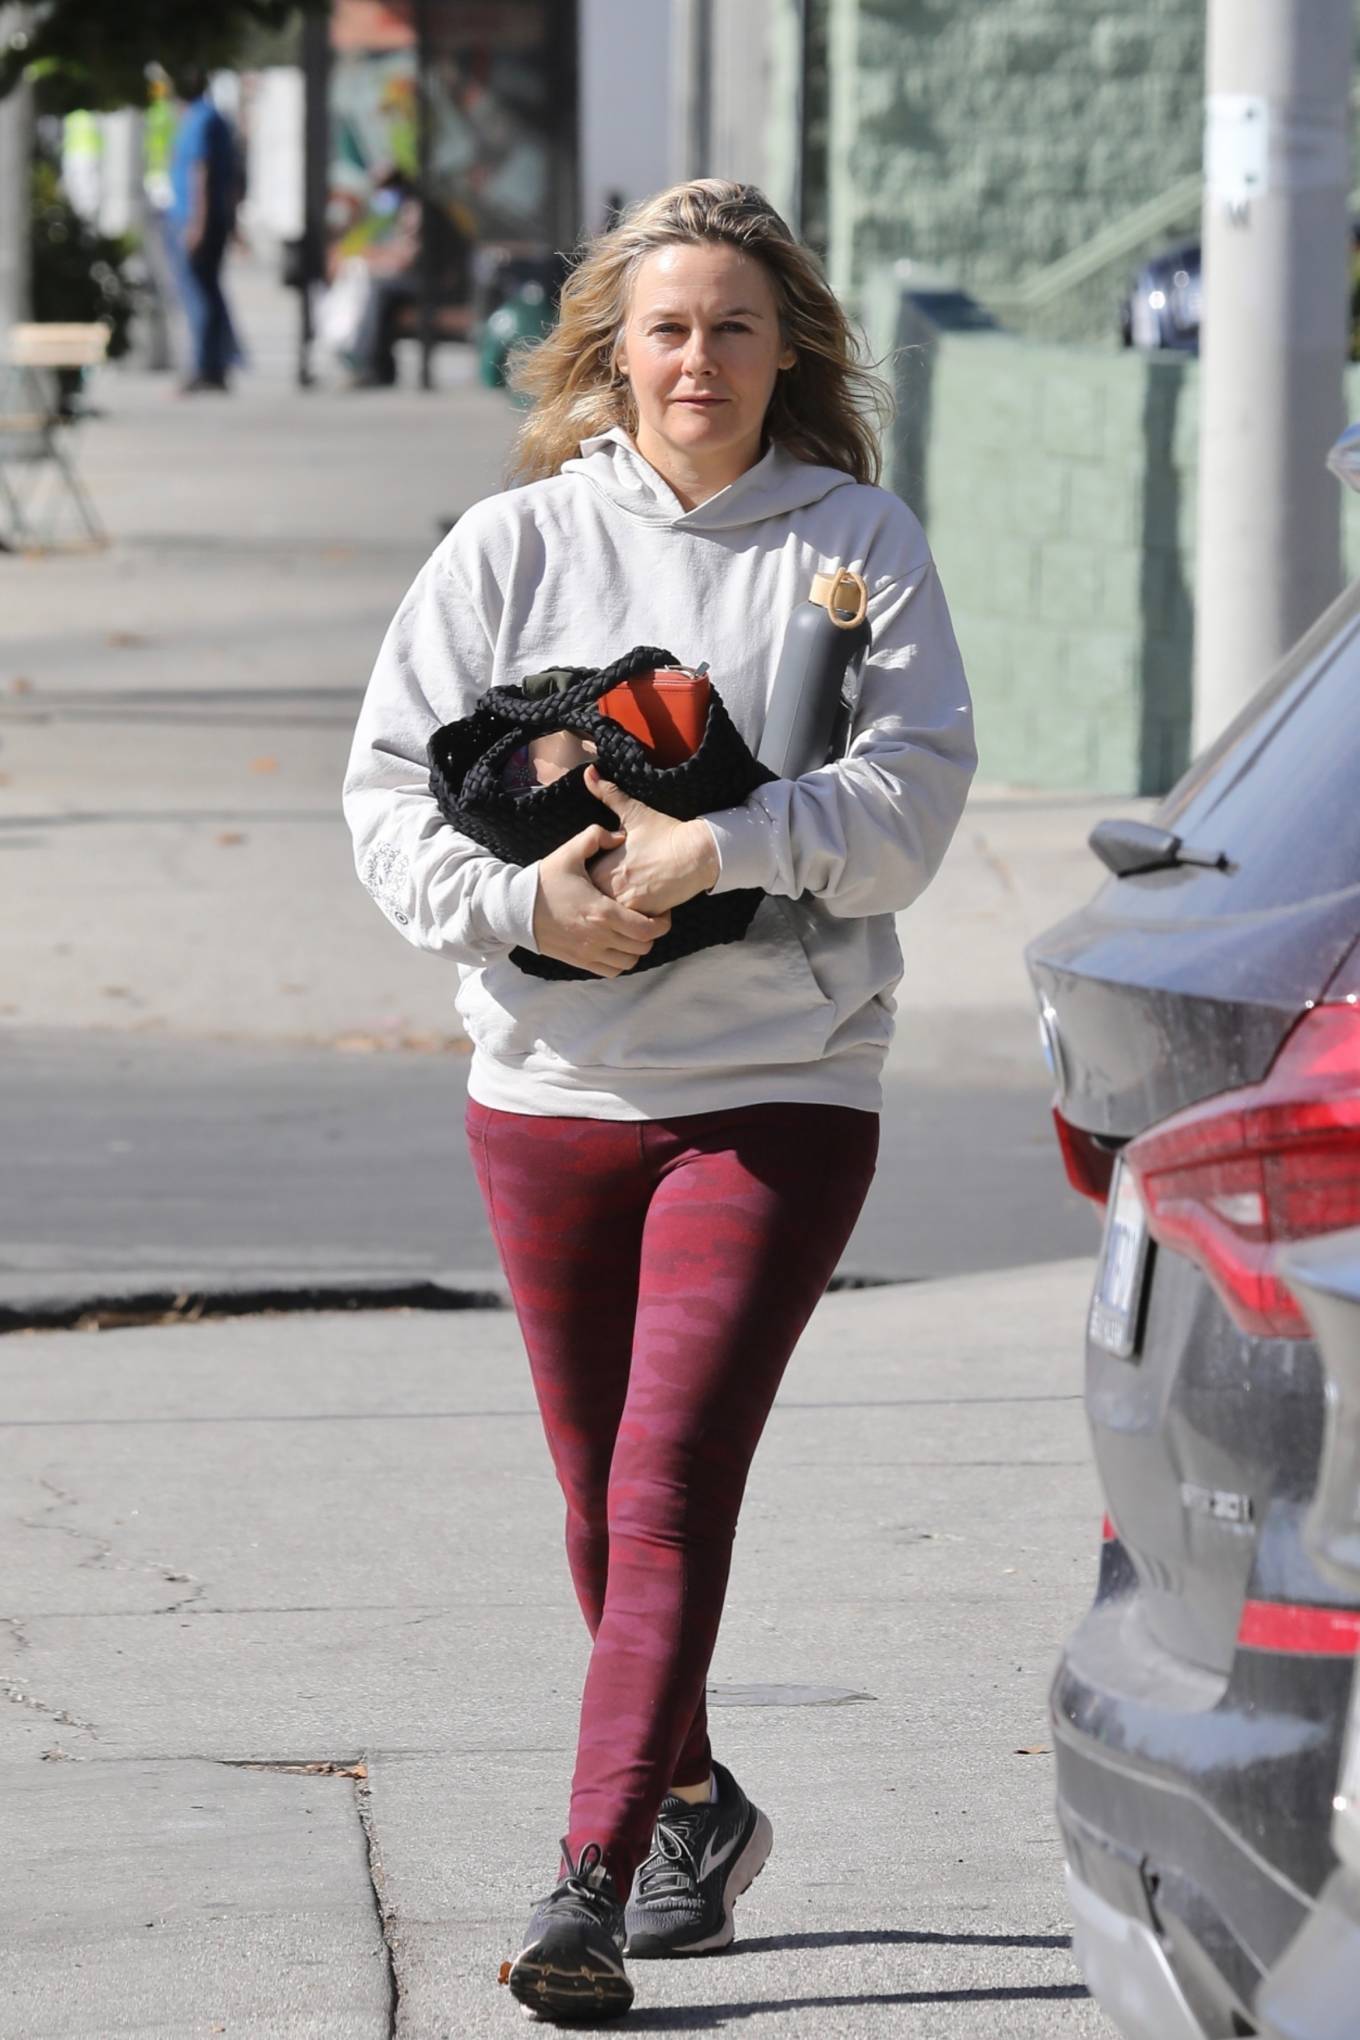 Alicia Silverstone - Seen while out in West Hollywood